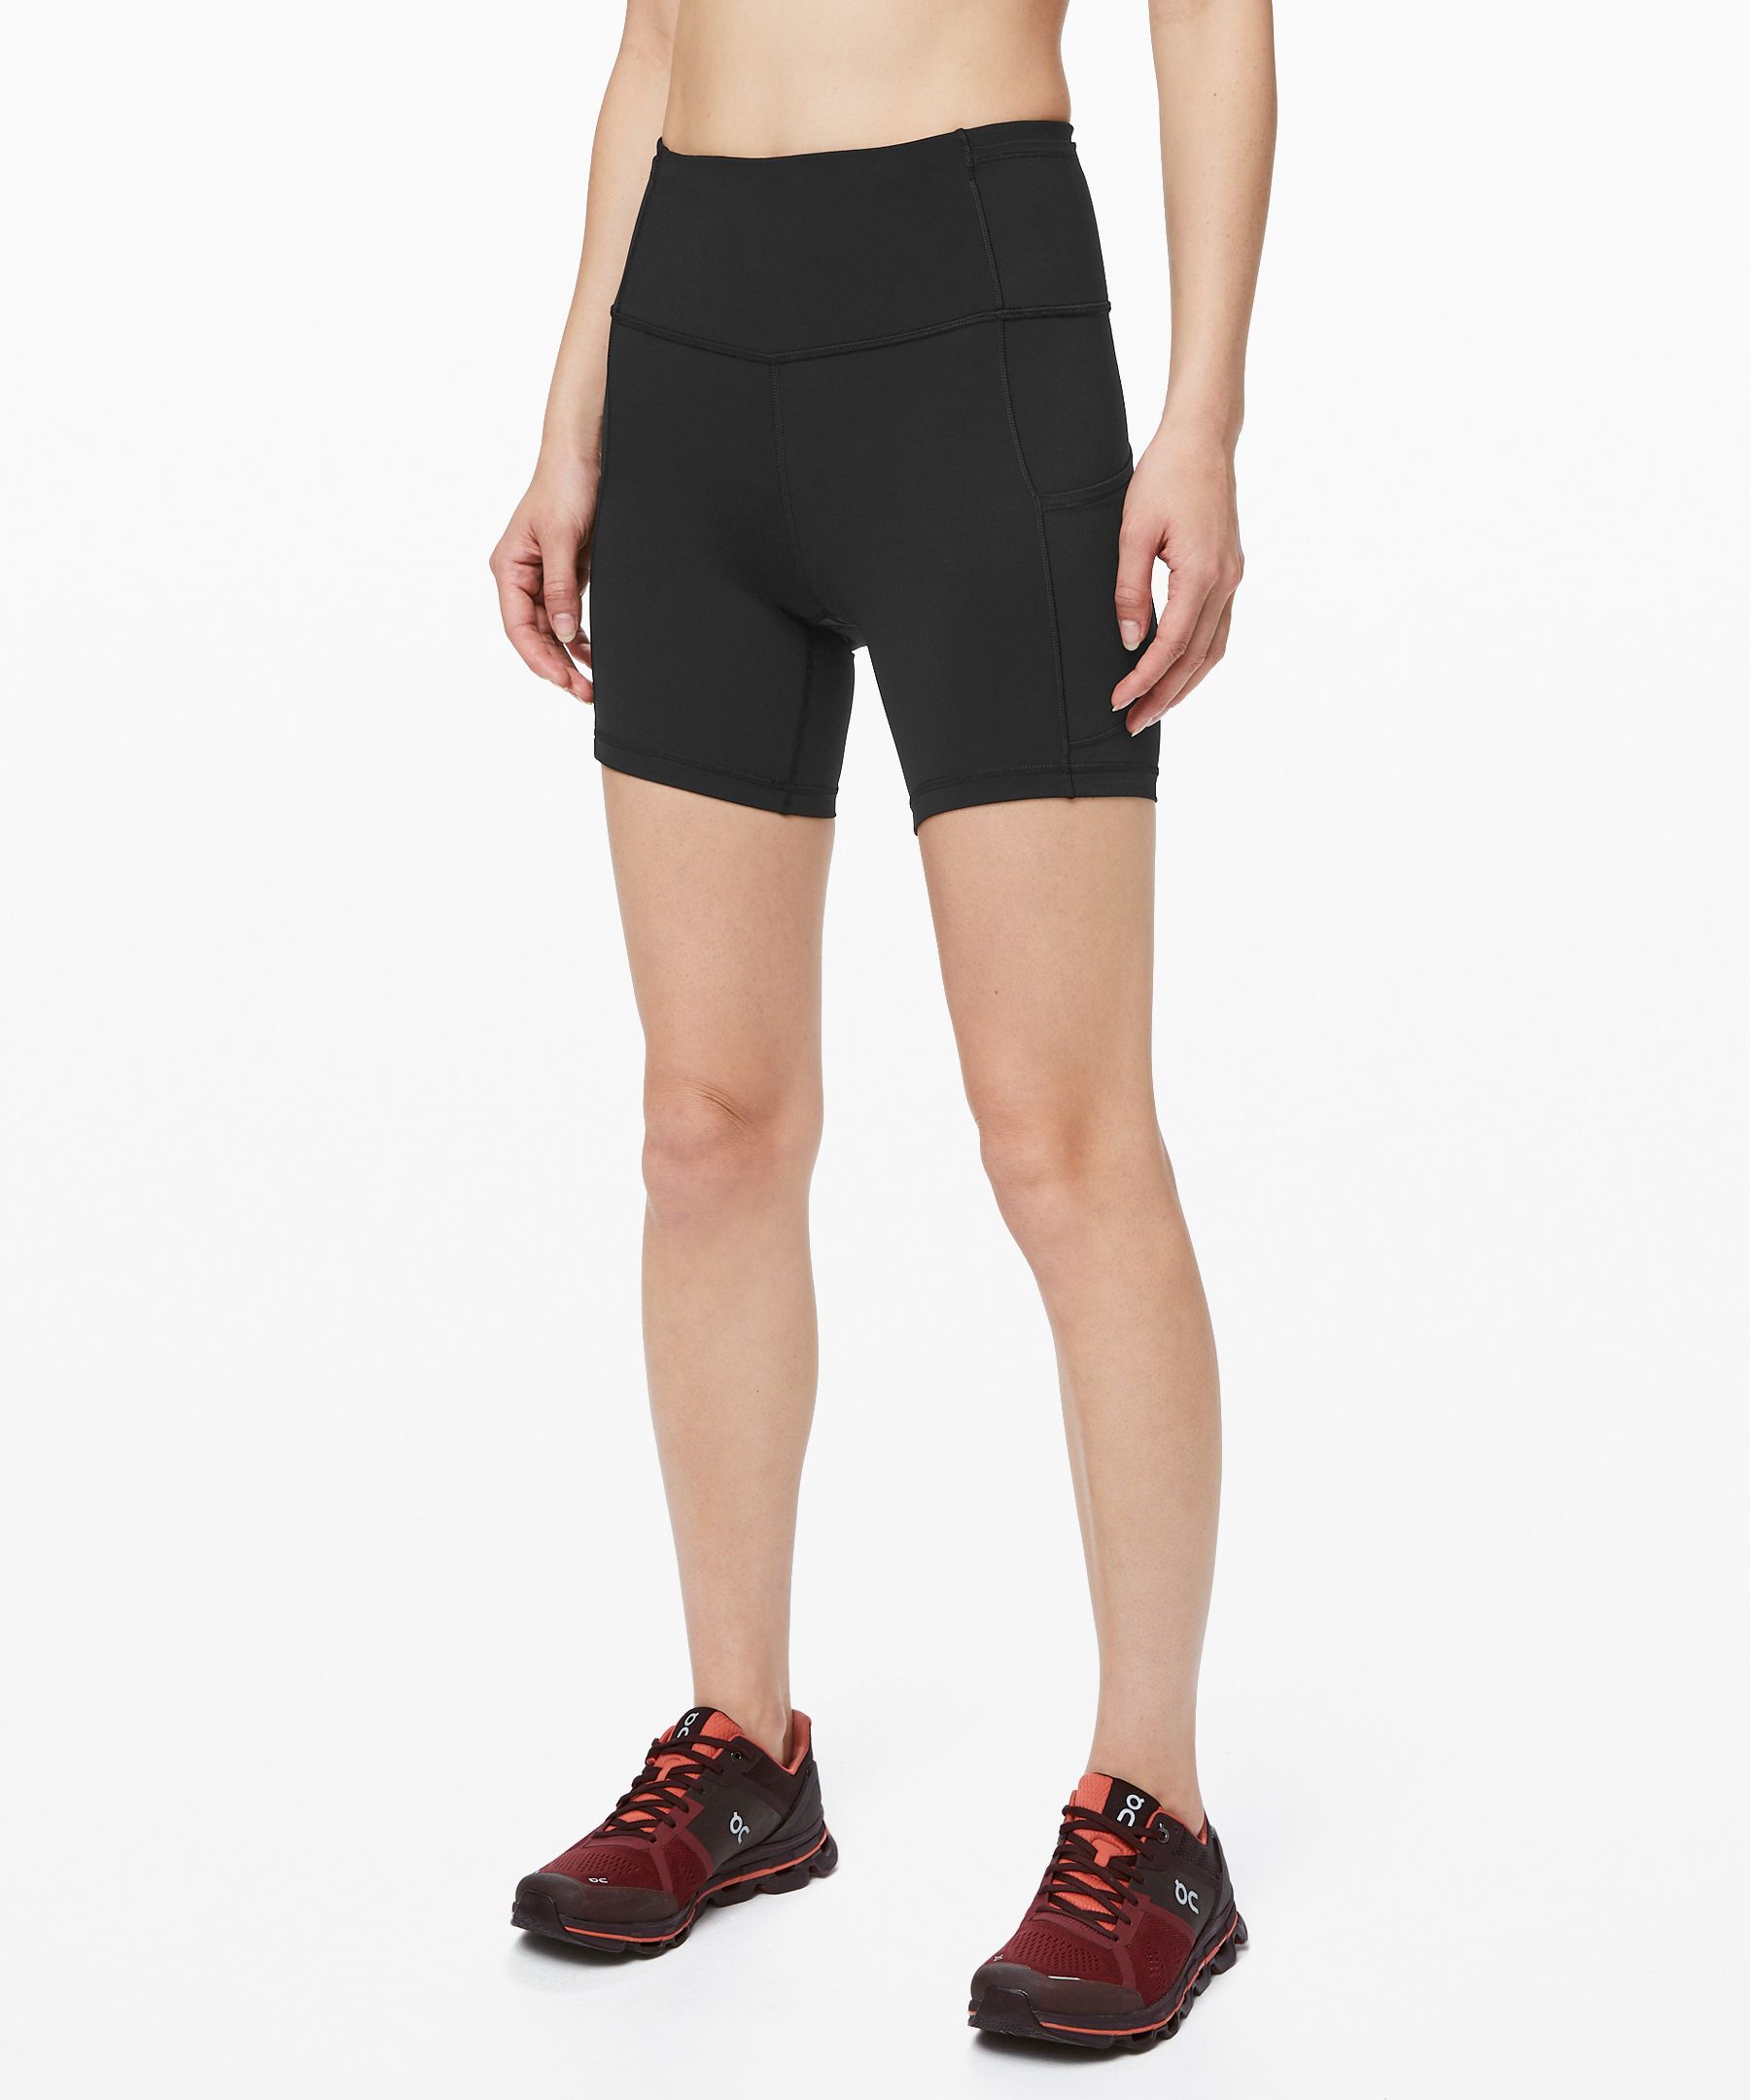 Reviewing the lululemon fast and free shorts for running. Here is